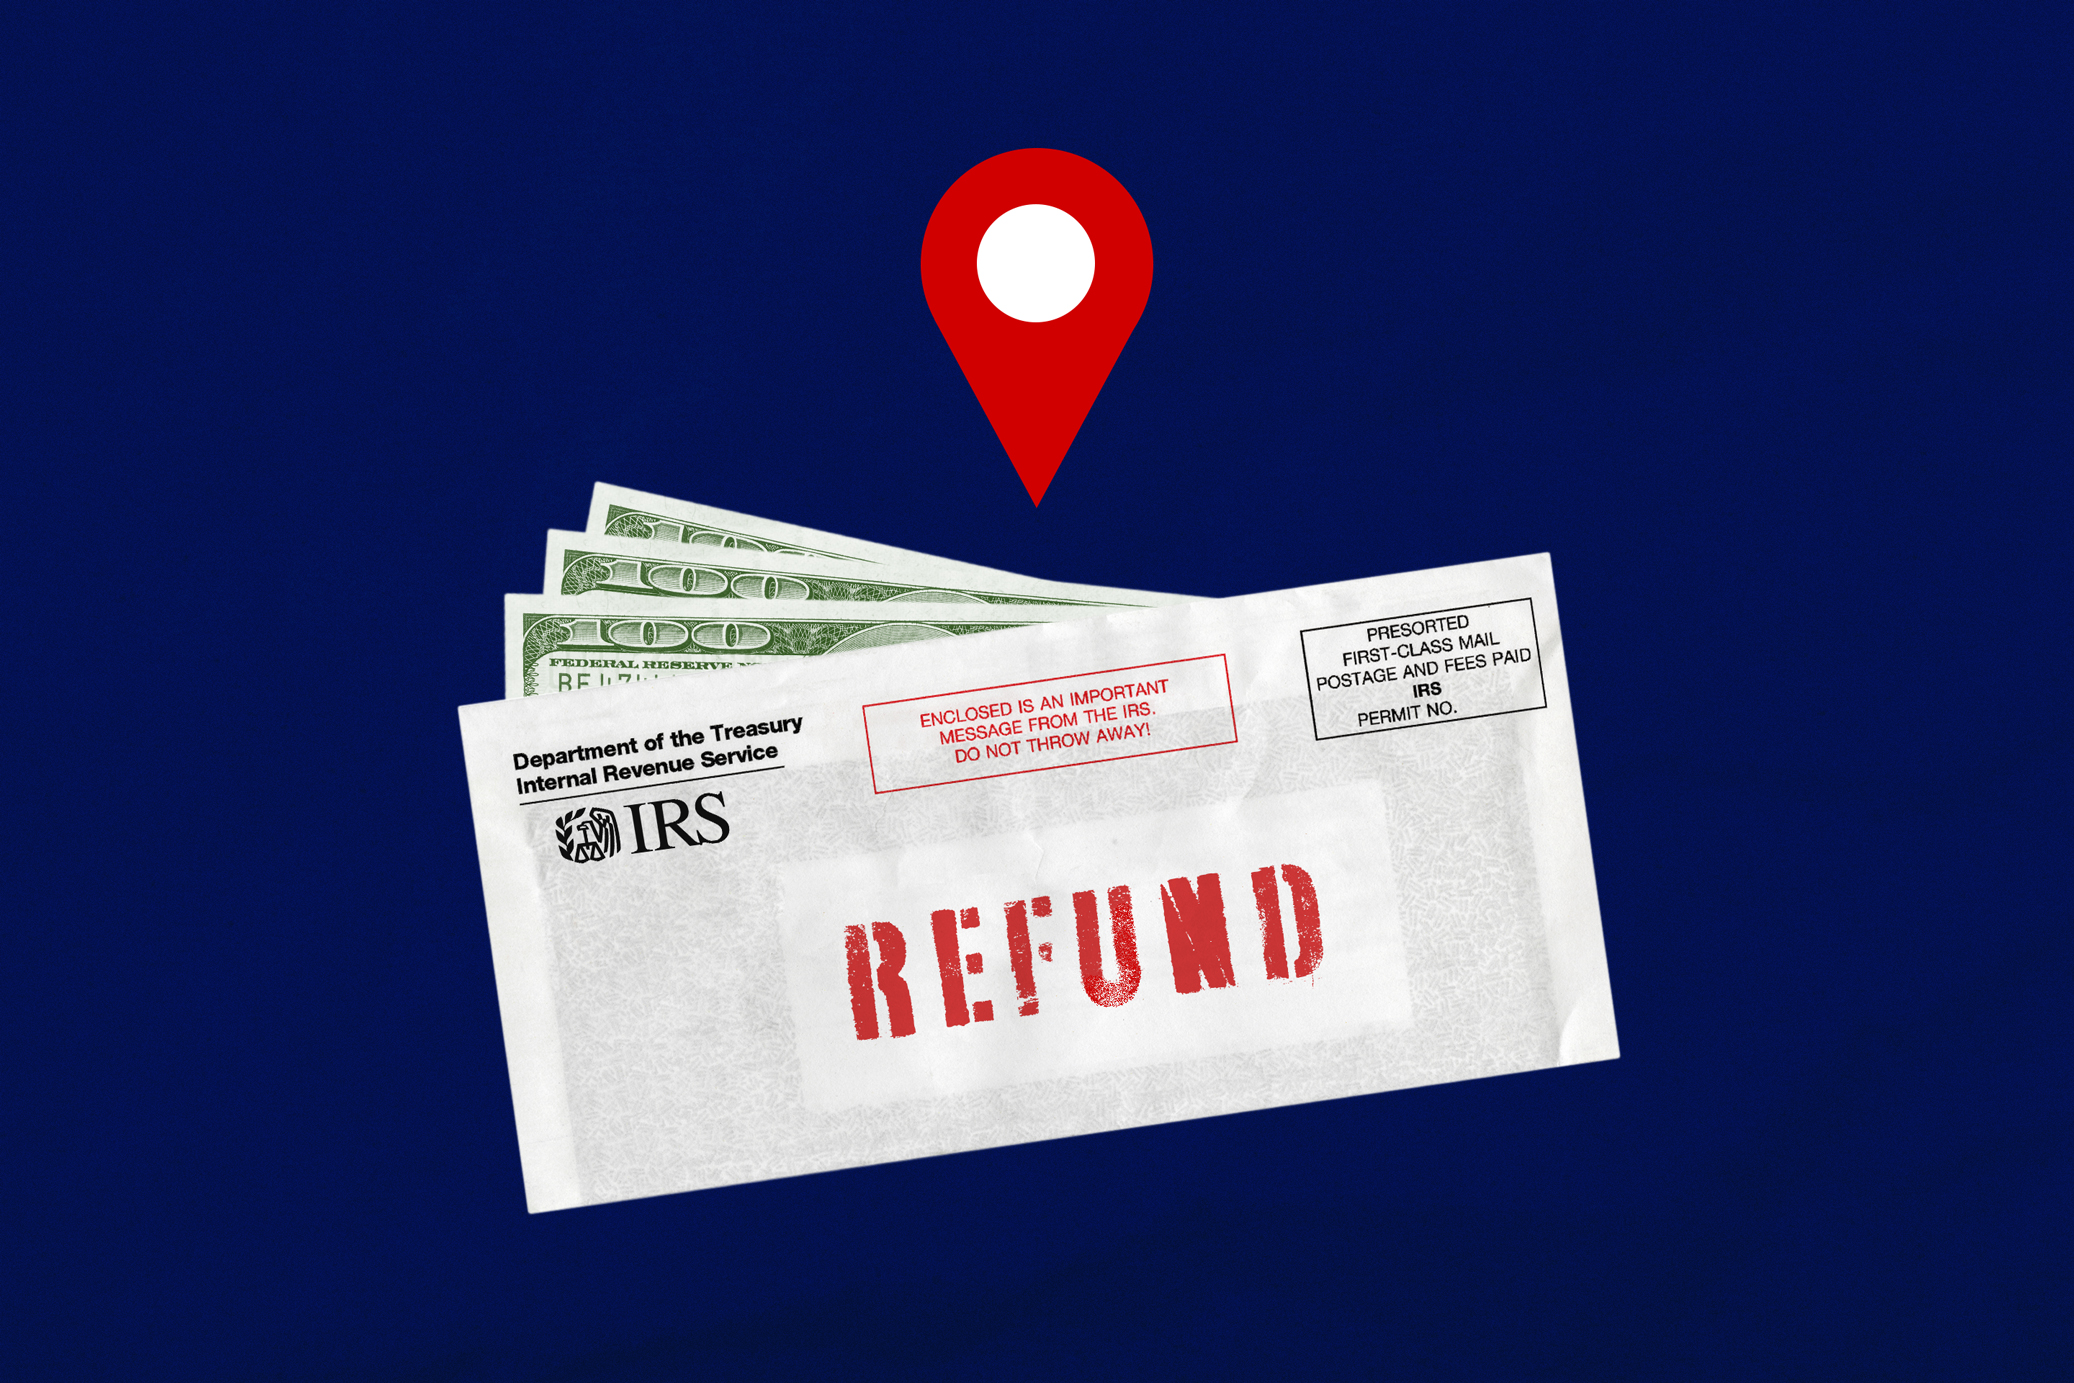 where-s-my-refund-how-to-track-your-tax-refund-2022-money